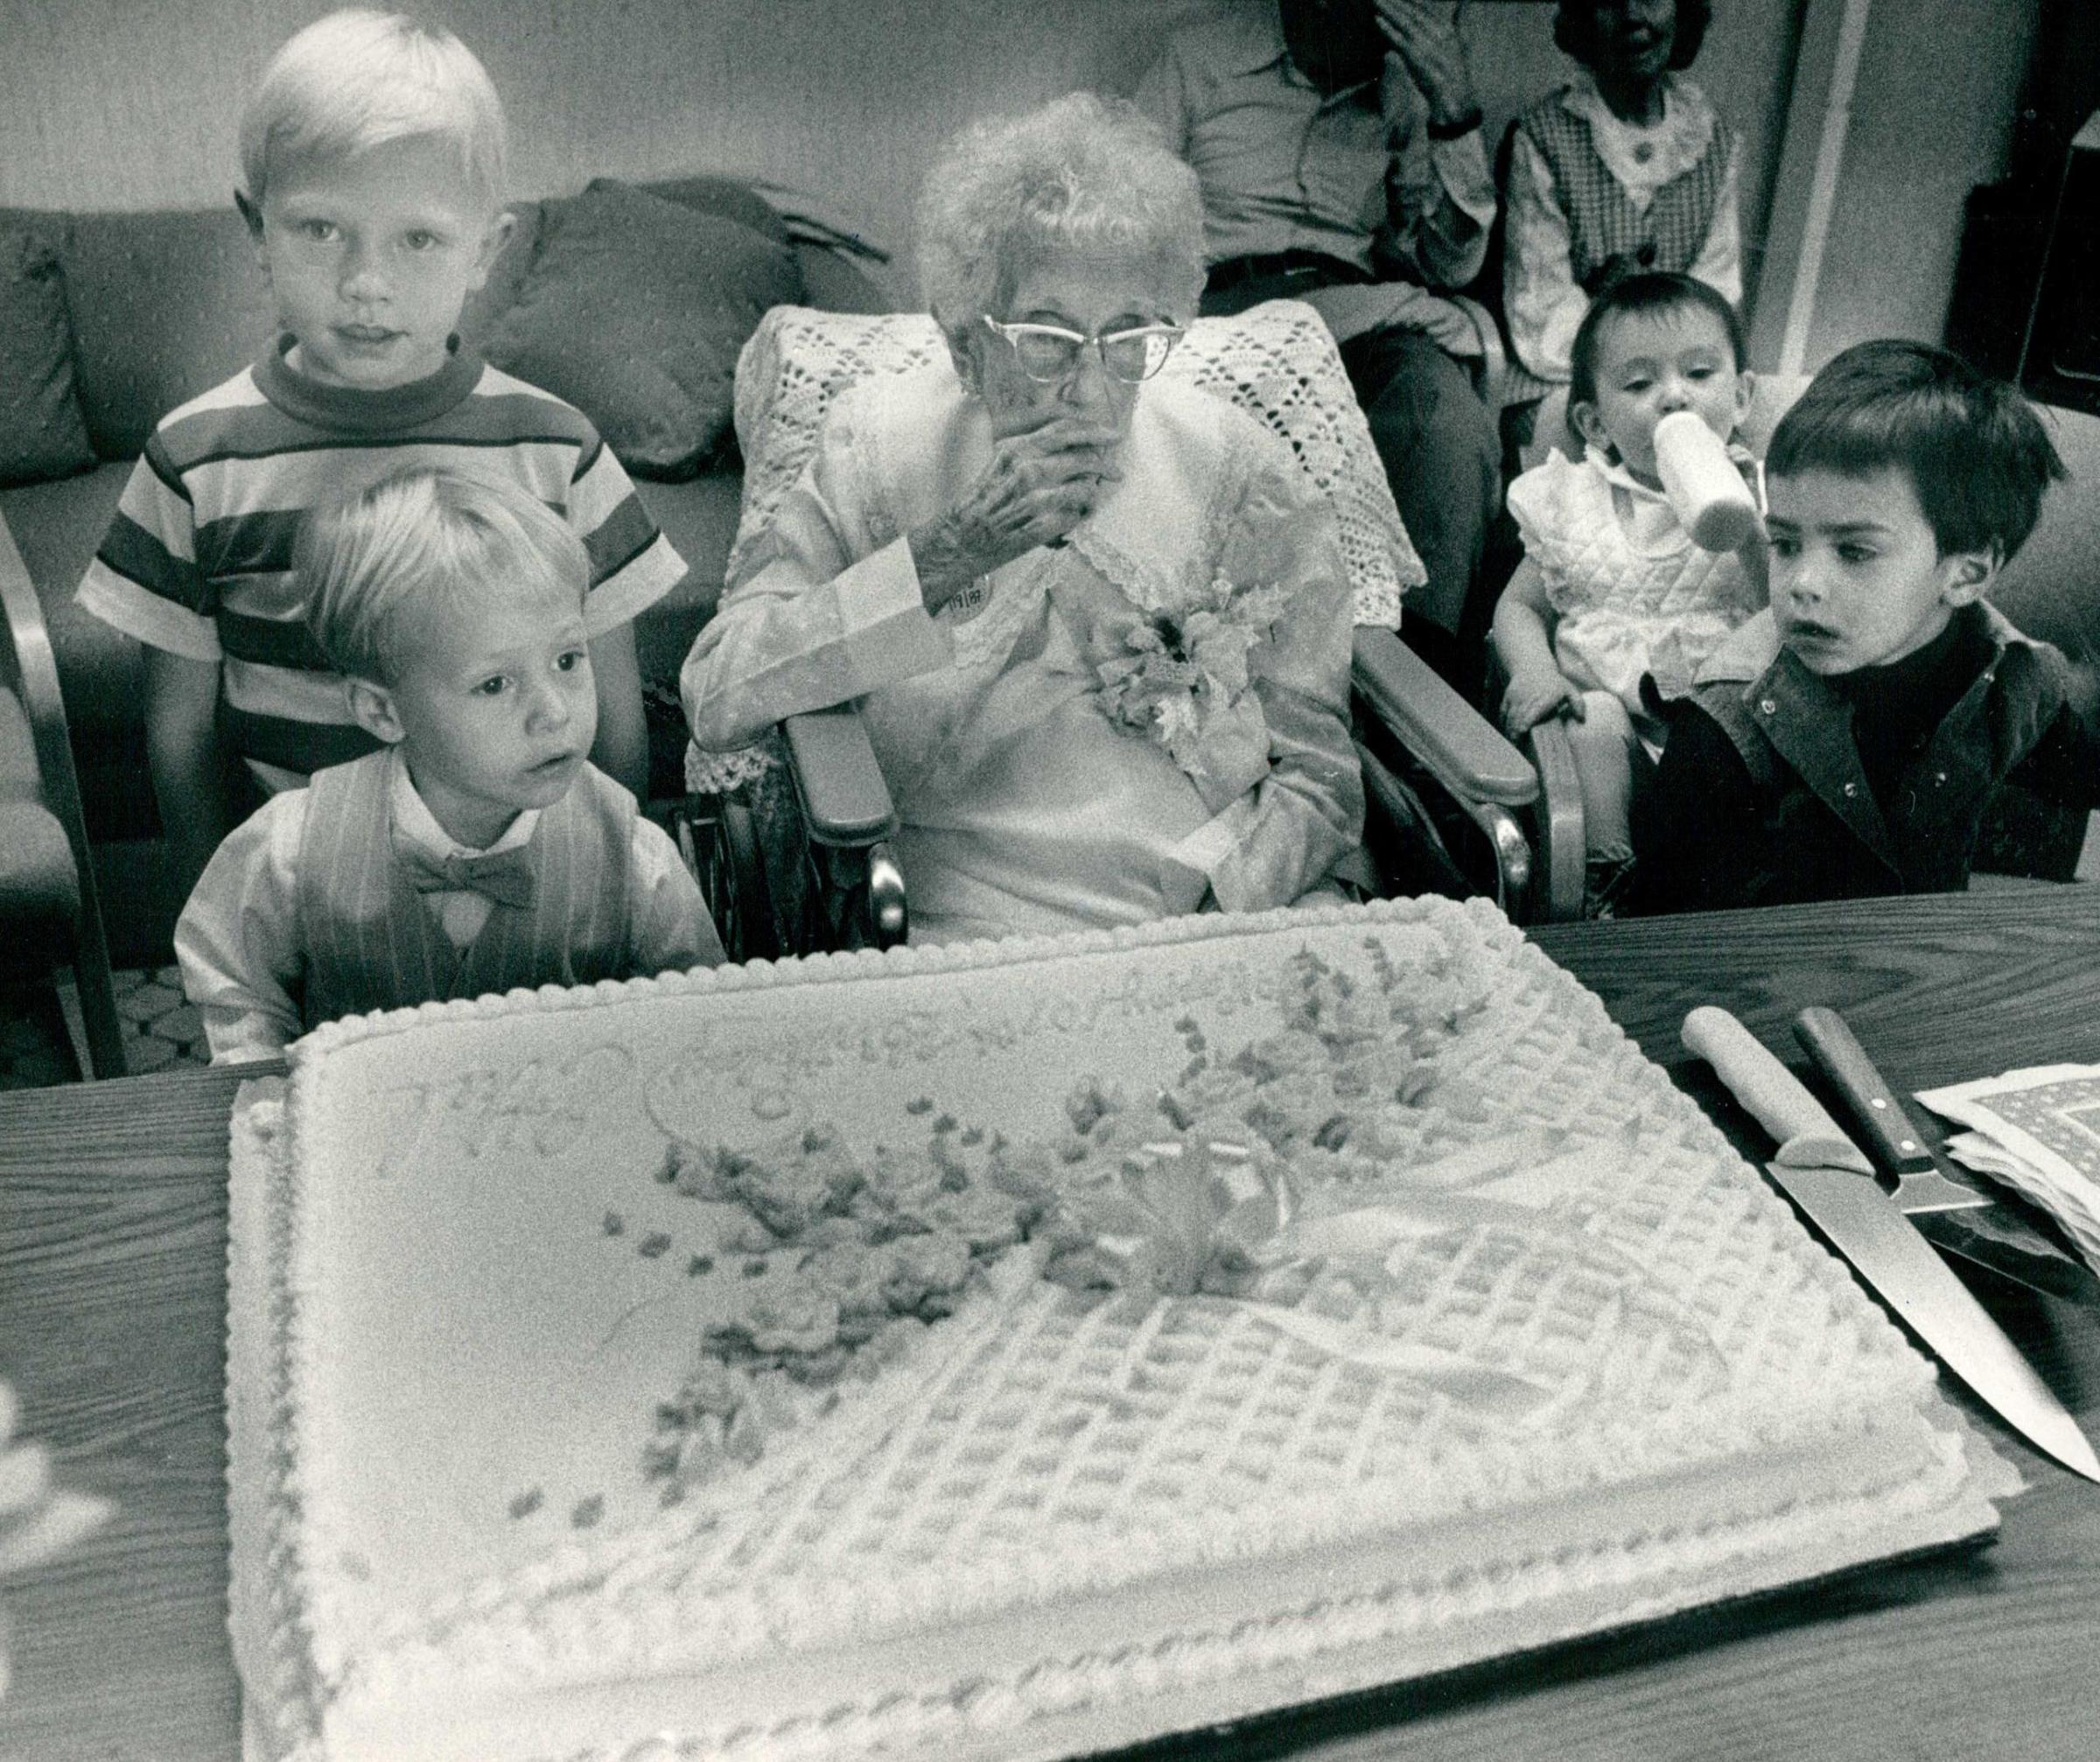 Ethel Lang celebrates her 107th birthday with her great great grandchildren on Sept. 21 1987 in the Bear Creek Nursing Home. Lang was born on May 27, 1900.